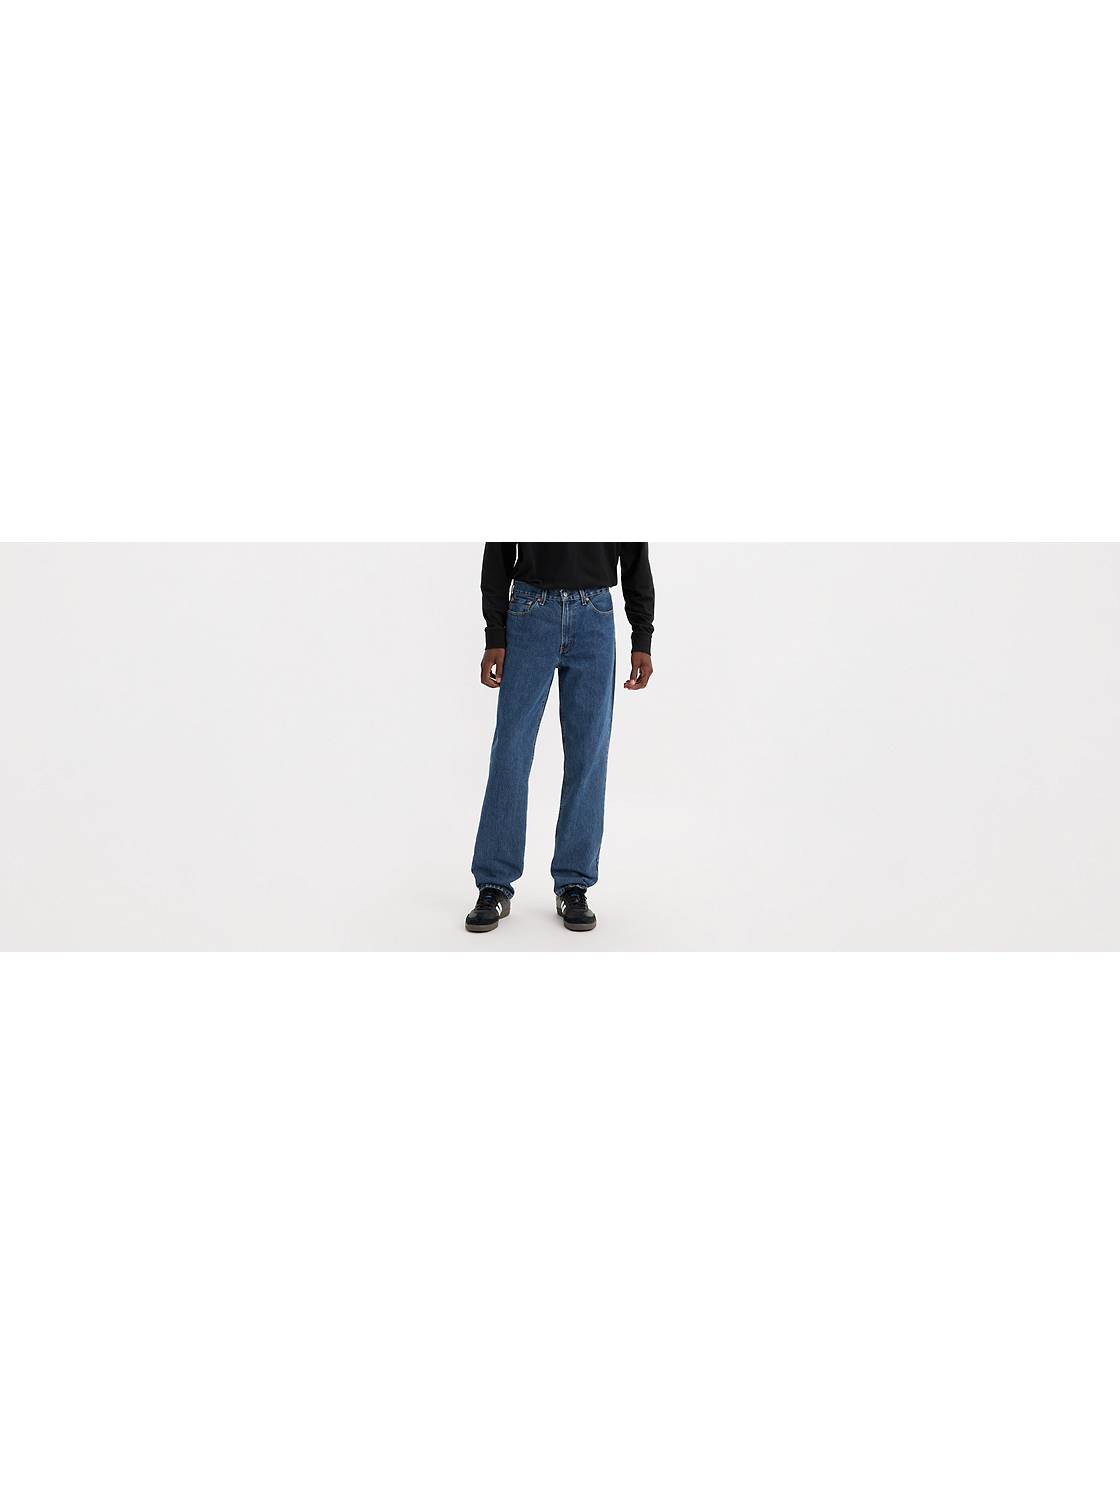 Men's Non-Stretch Cotton Relaxed Jeans | Levi's®